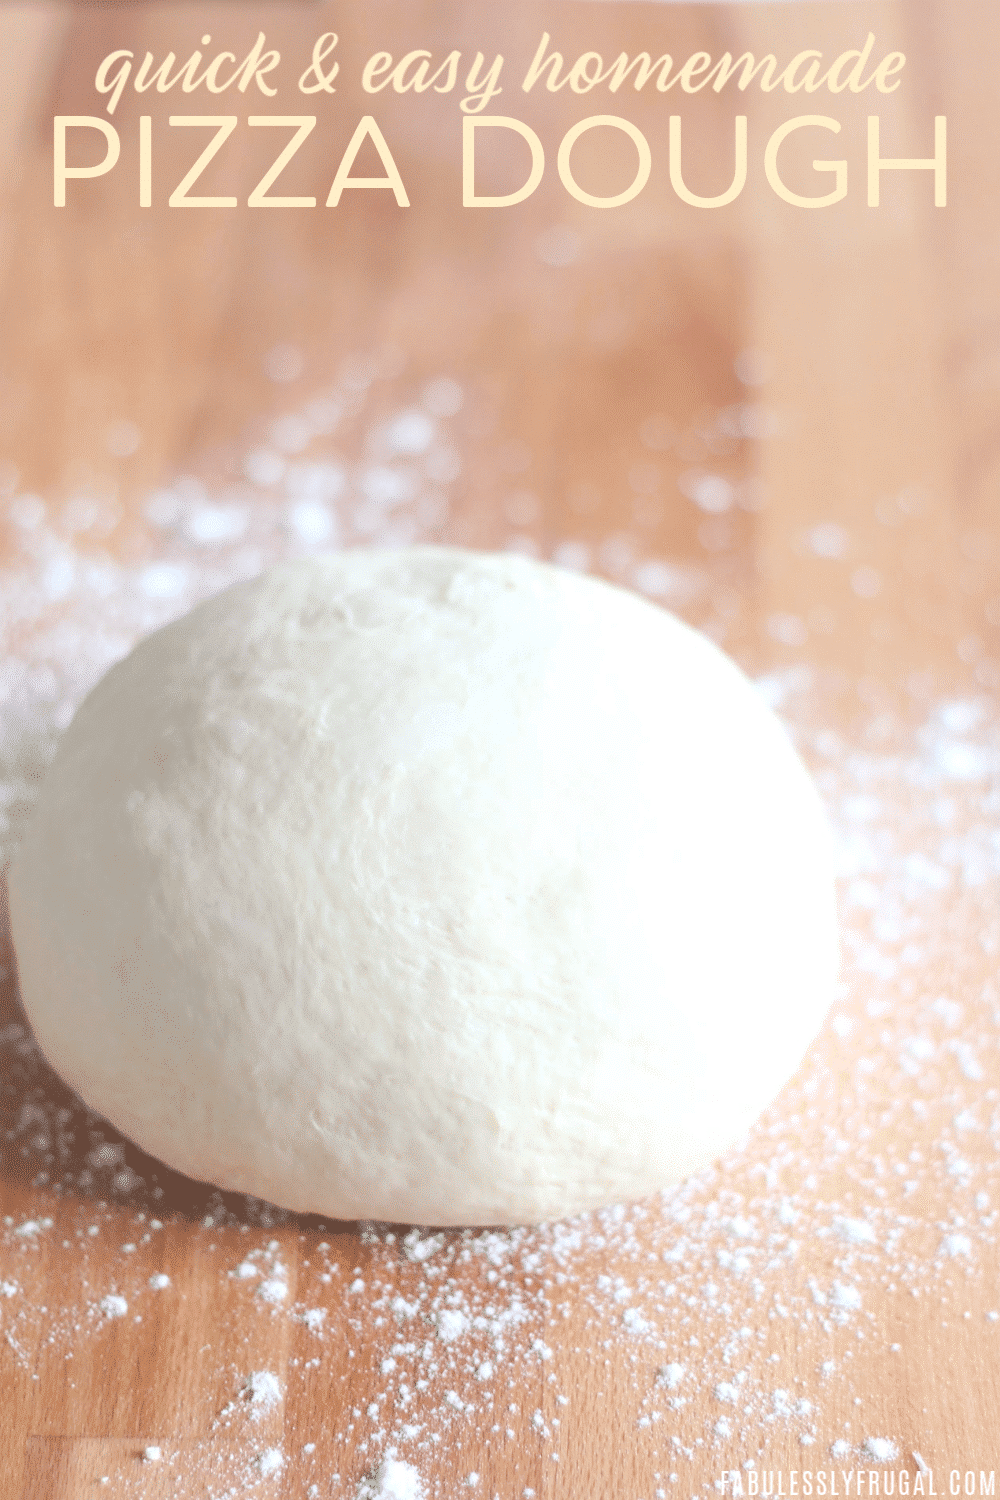 How to make pizza dough at home